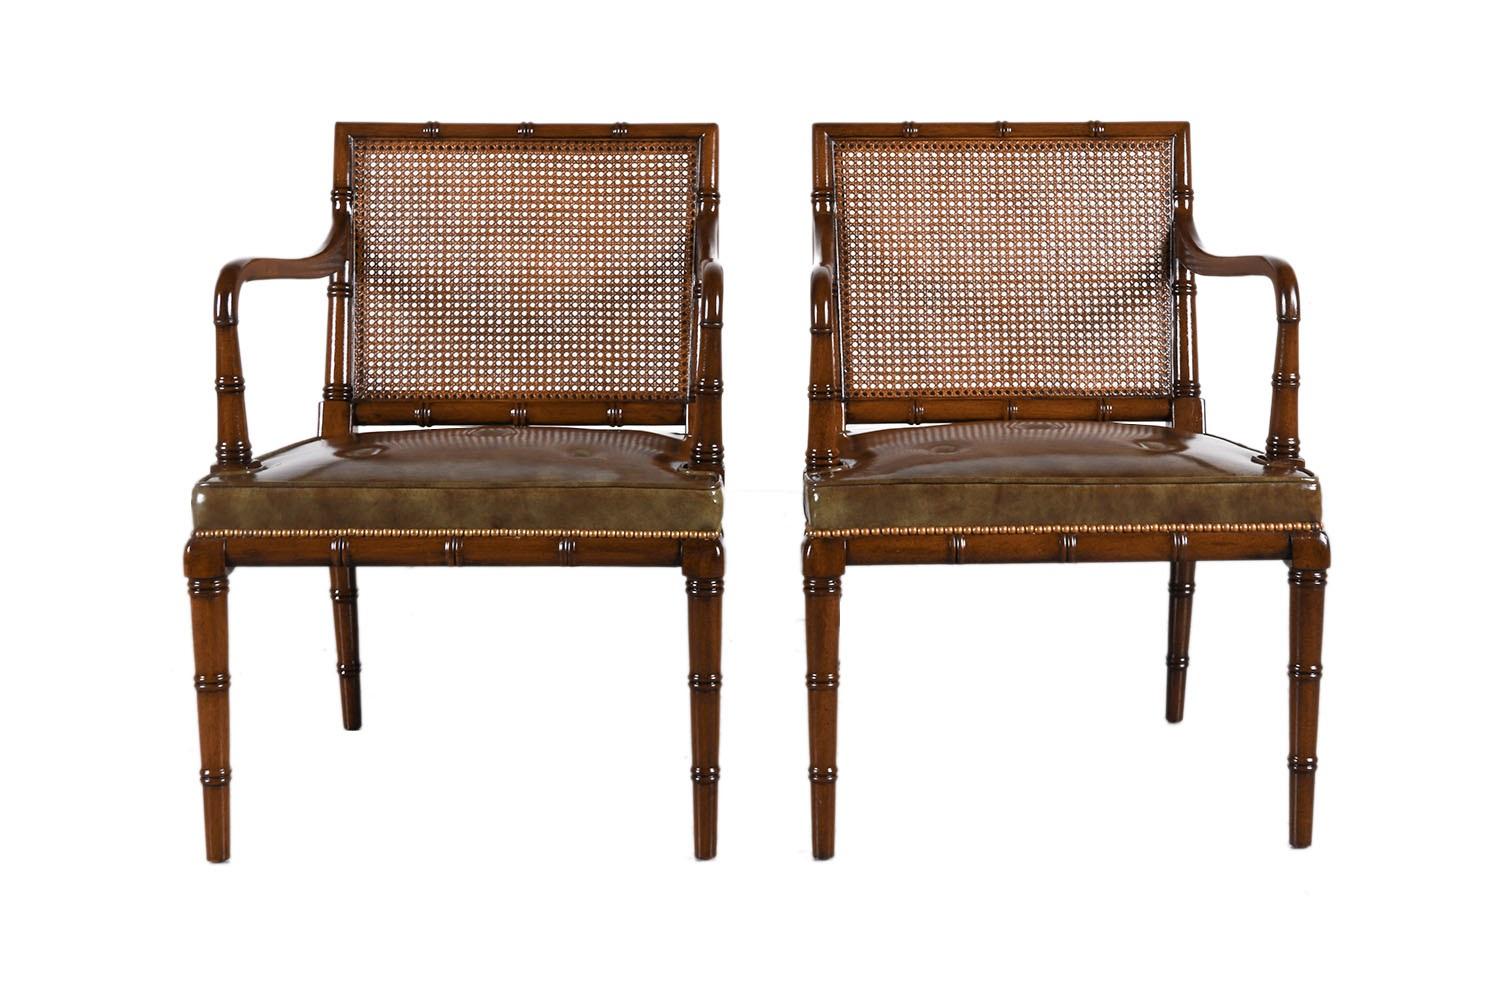 A beautiful rare pair of Hollywood Regency-style accent chairs by Hickory Chair N.C. This rare pair features faux bamboo frames with caned backs which make an interesting focal point for the eye while the gentle subtle outward-splay back legs